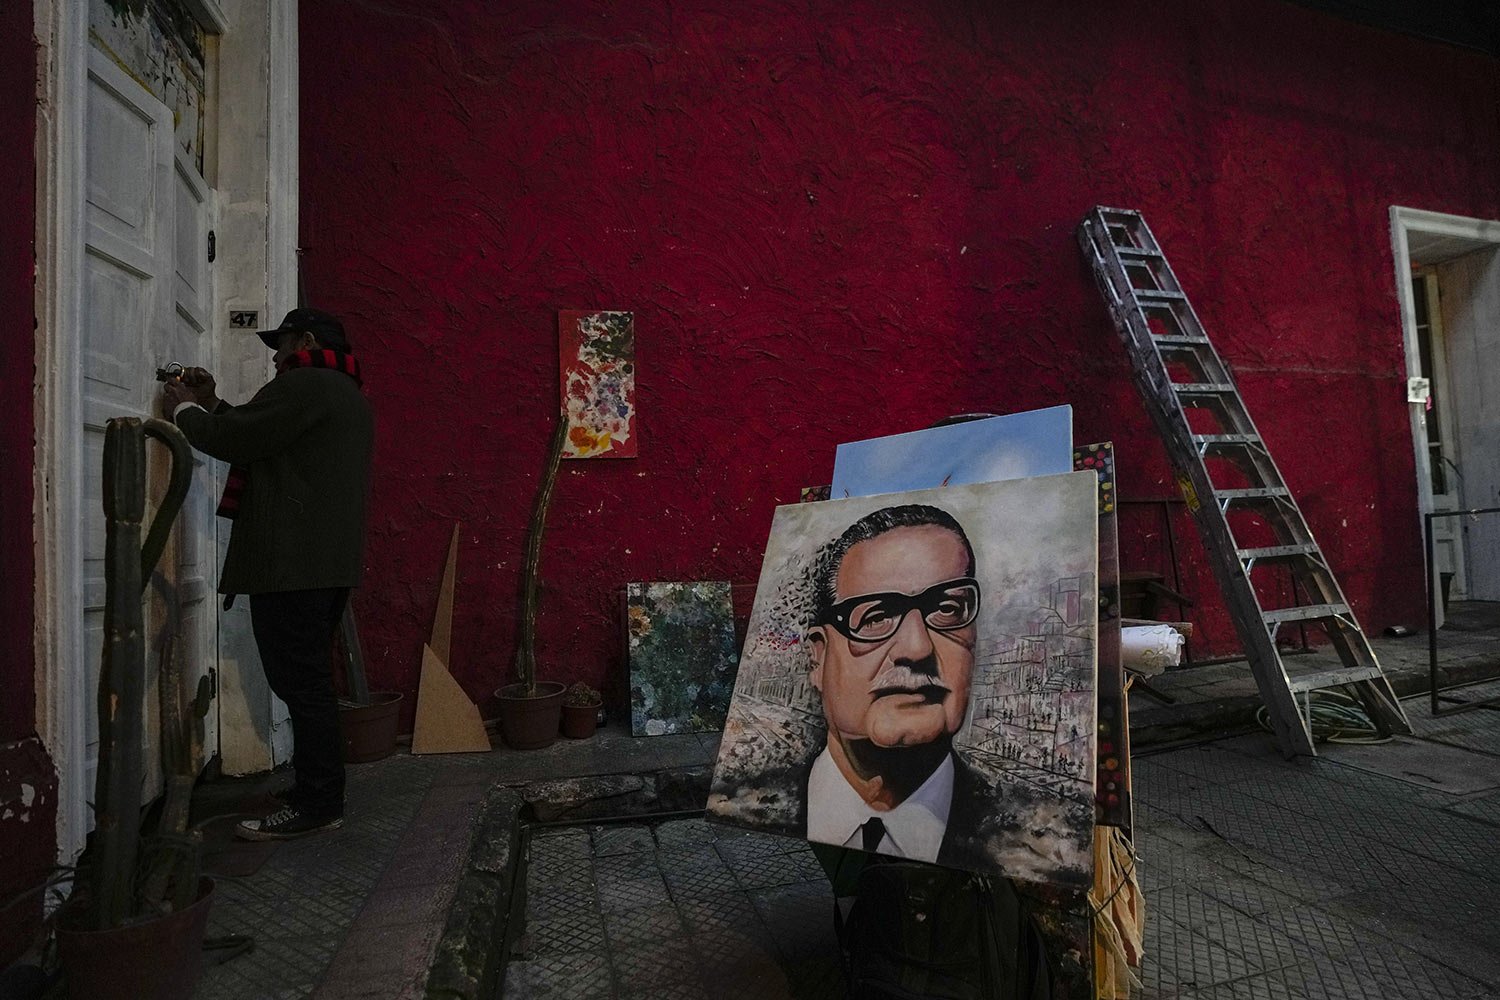  Painter Efren Cortes opens the door of his workshop after transporting his paintings, including one of the late President Salvador Allende, on a dolly from the Plaza de Armas, where he has been selling his paintings for over 30 years in Santiago, Ch